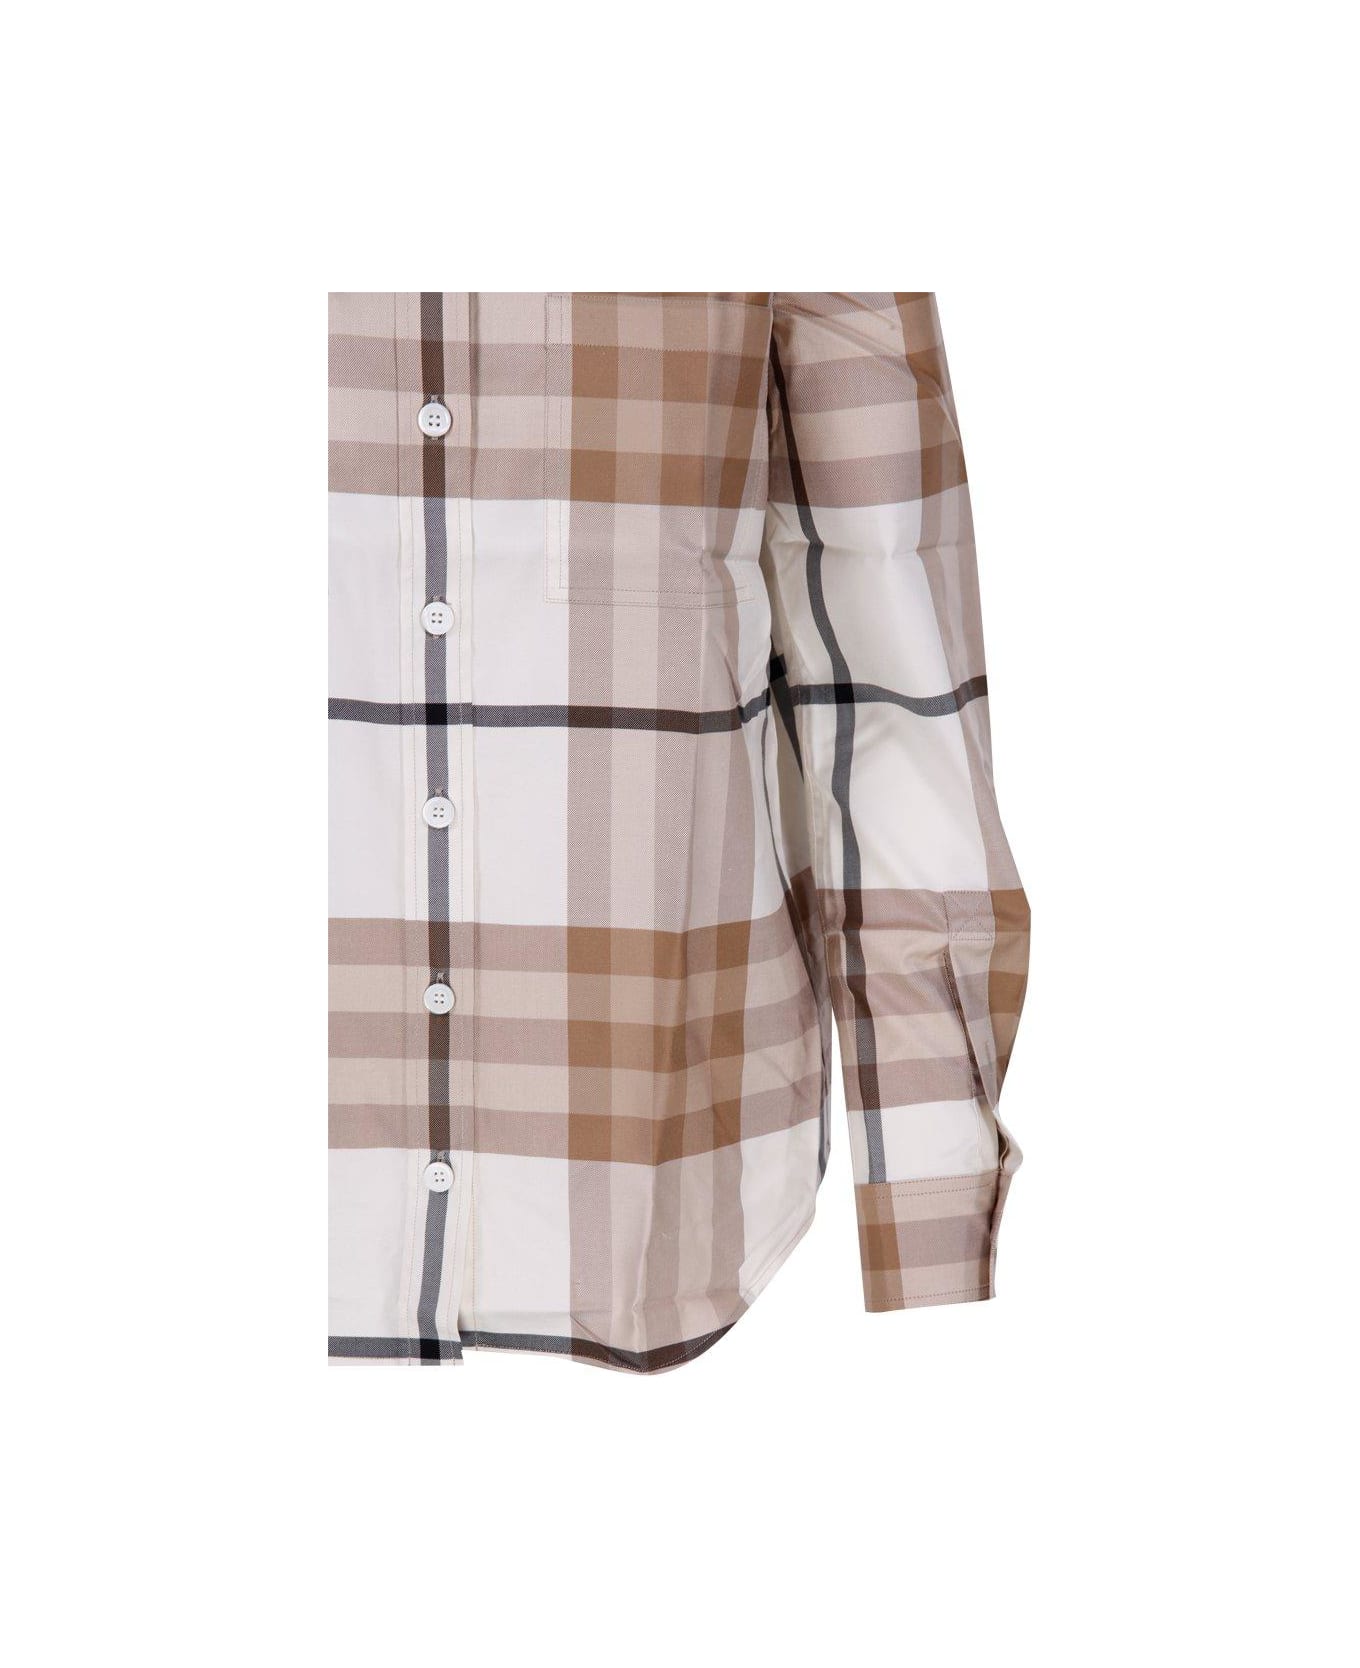 Burberry Checked Long-sleeved Shirt - Bianco e Beige シャツ